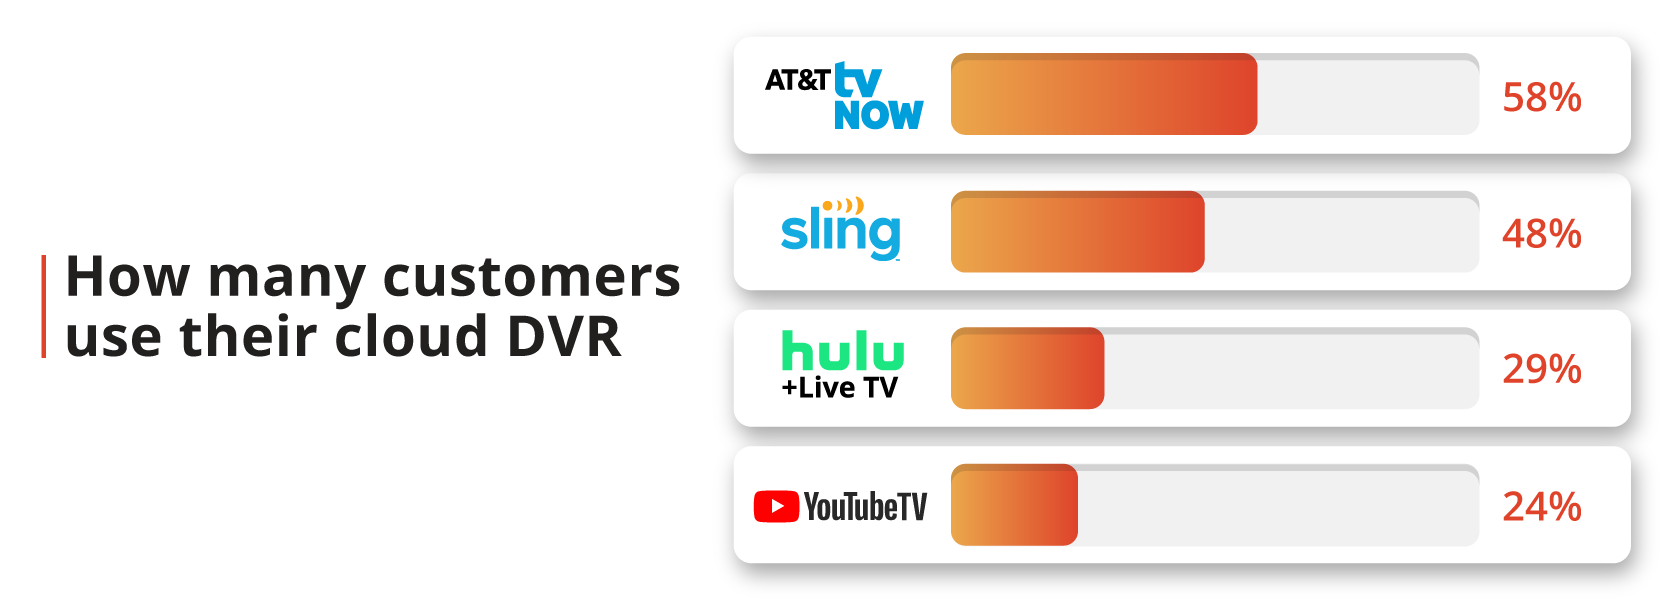 How many customers use their cloud DVR?